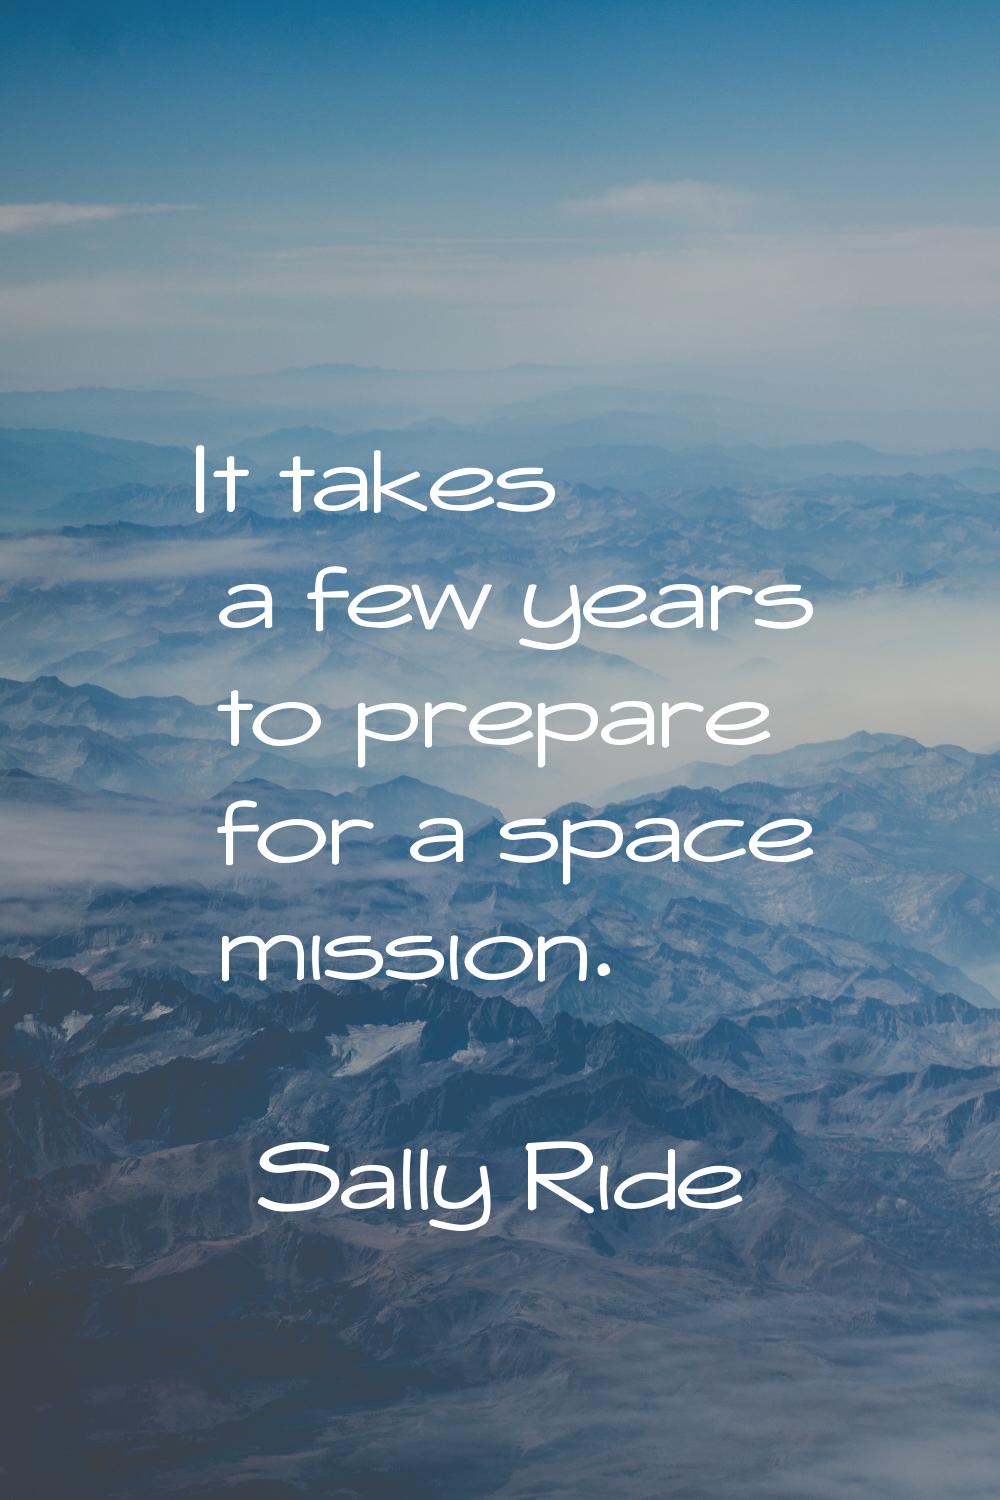 It takes a few years to prepare for a space mission.